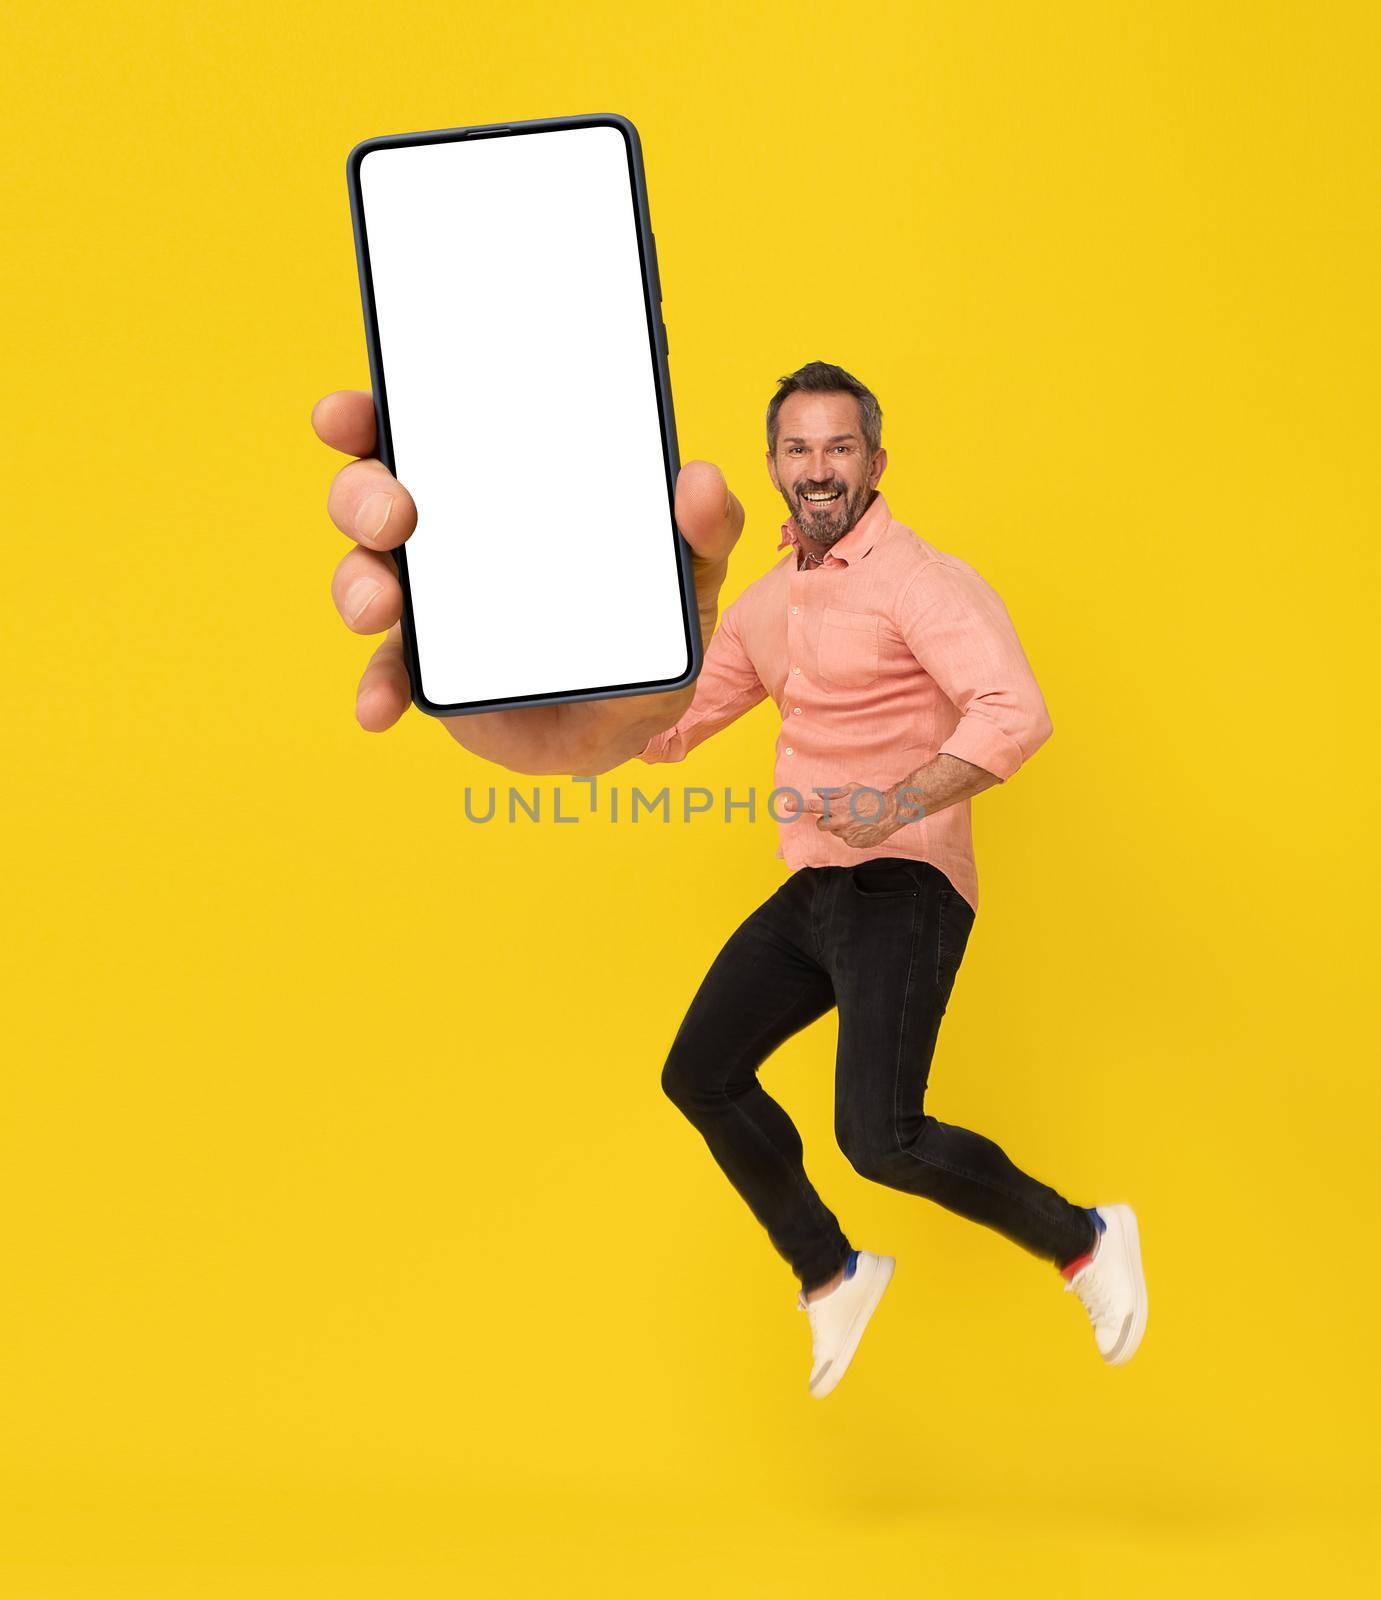 Excited middle aged man 40s jump with smartphone with white screen in hand happy smiling on camera wearing peach shirt and black jeans isolated on yellow background. Mobile app advertisement.